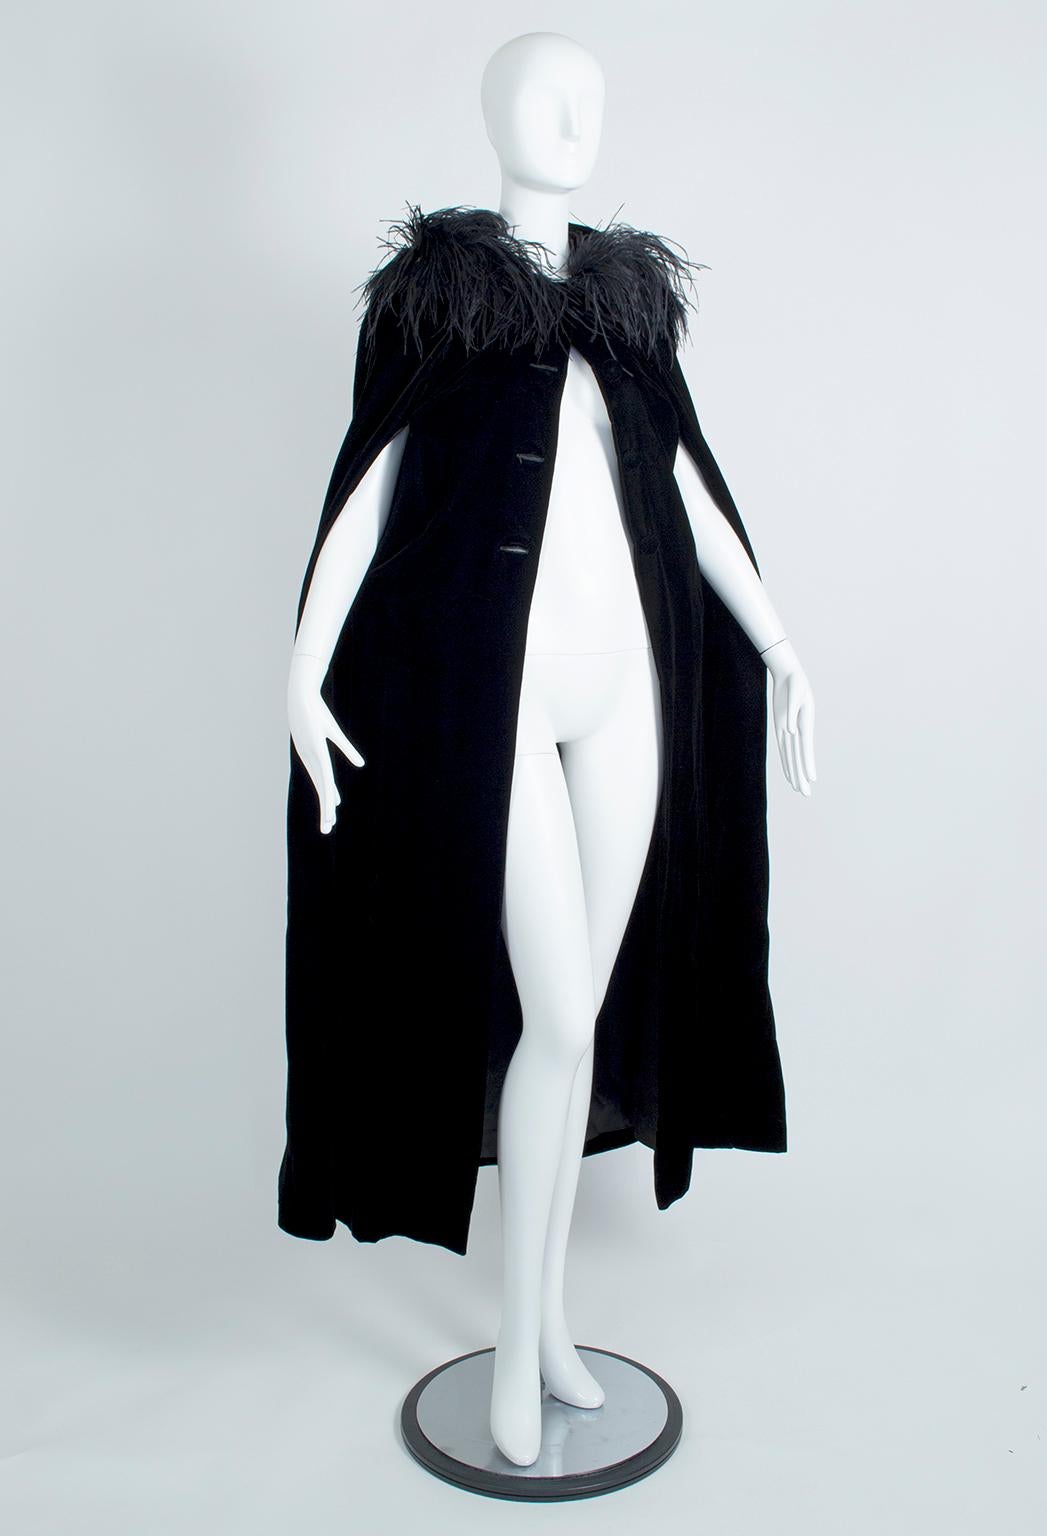 As mysterious as it is beautiful, this dramatic cape both frames and hides the face thanks to the 8